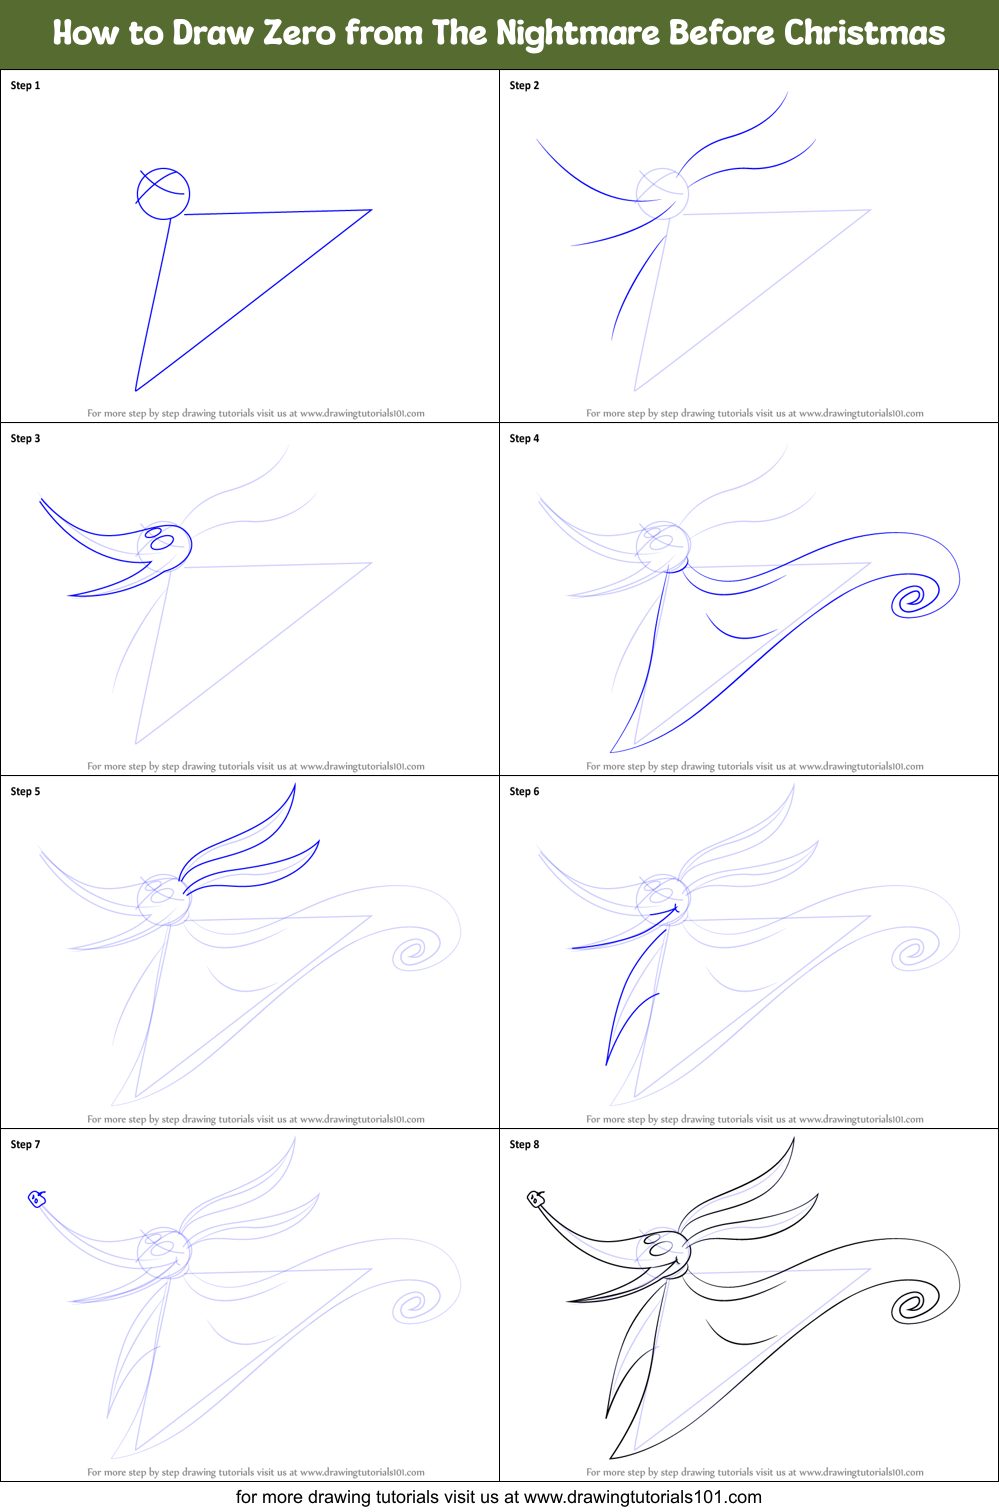 How to Draw Zero from The Nightmare Before Christmas printable step by